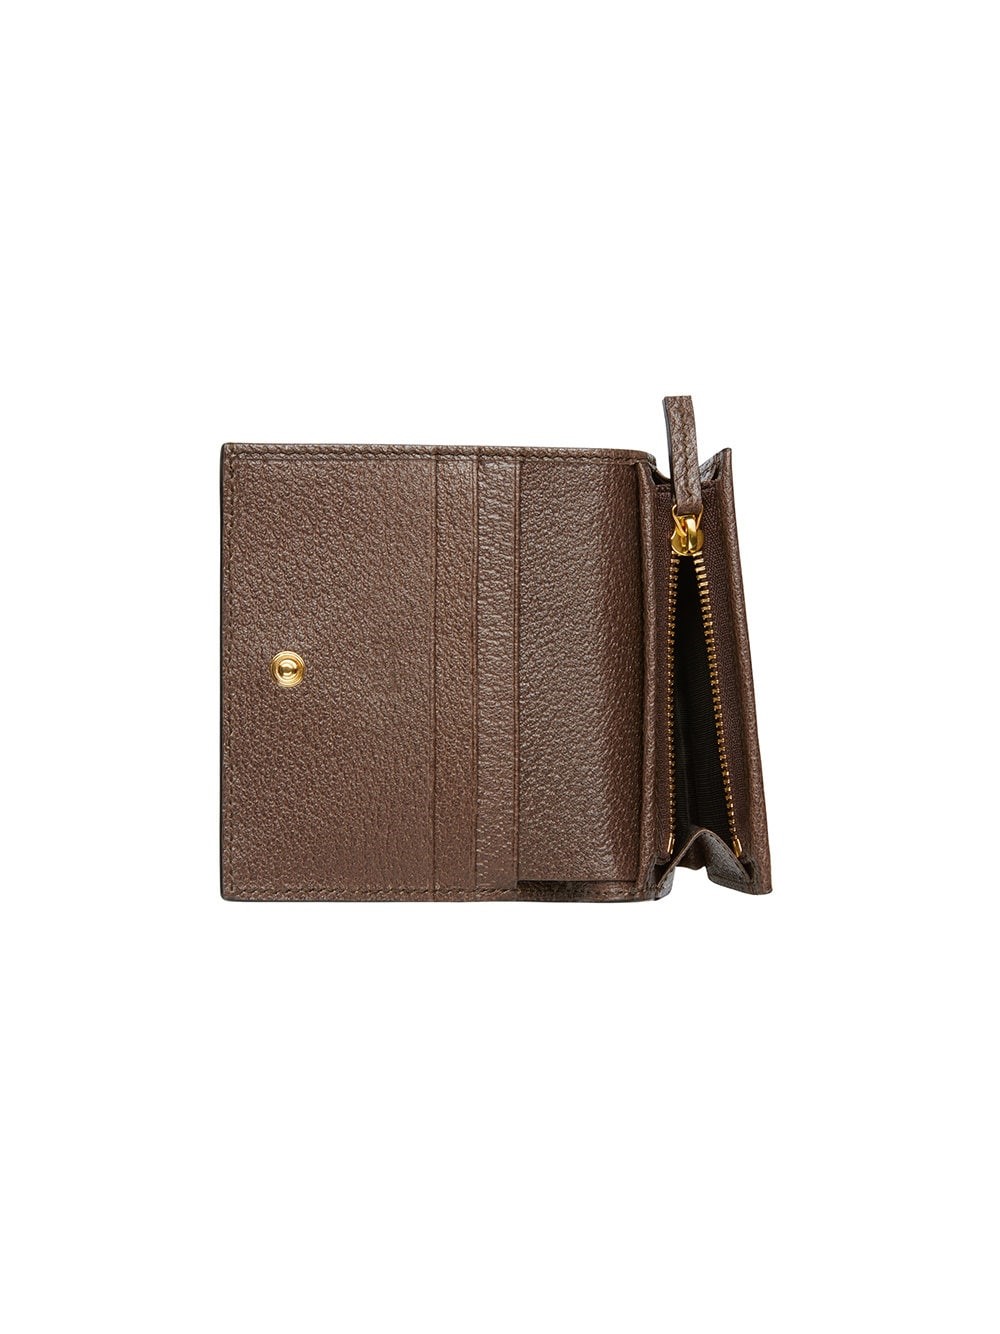 gucci OPHIDIA WALLET available on literacybasics.ca - 28407